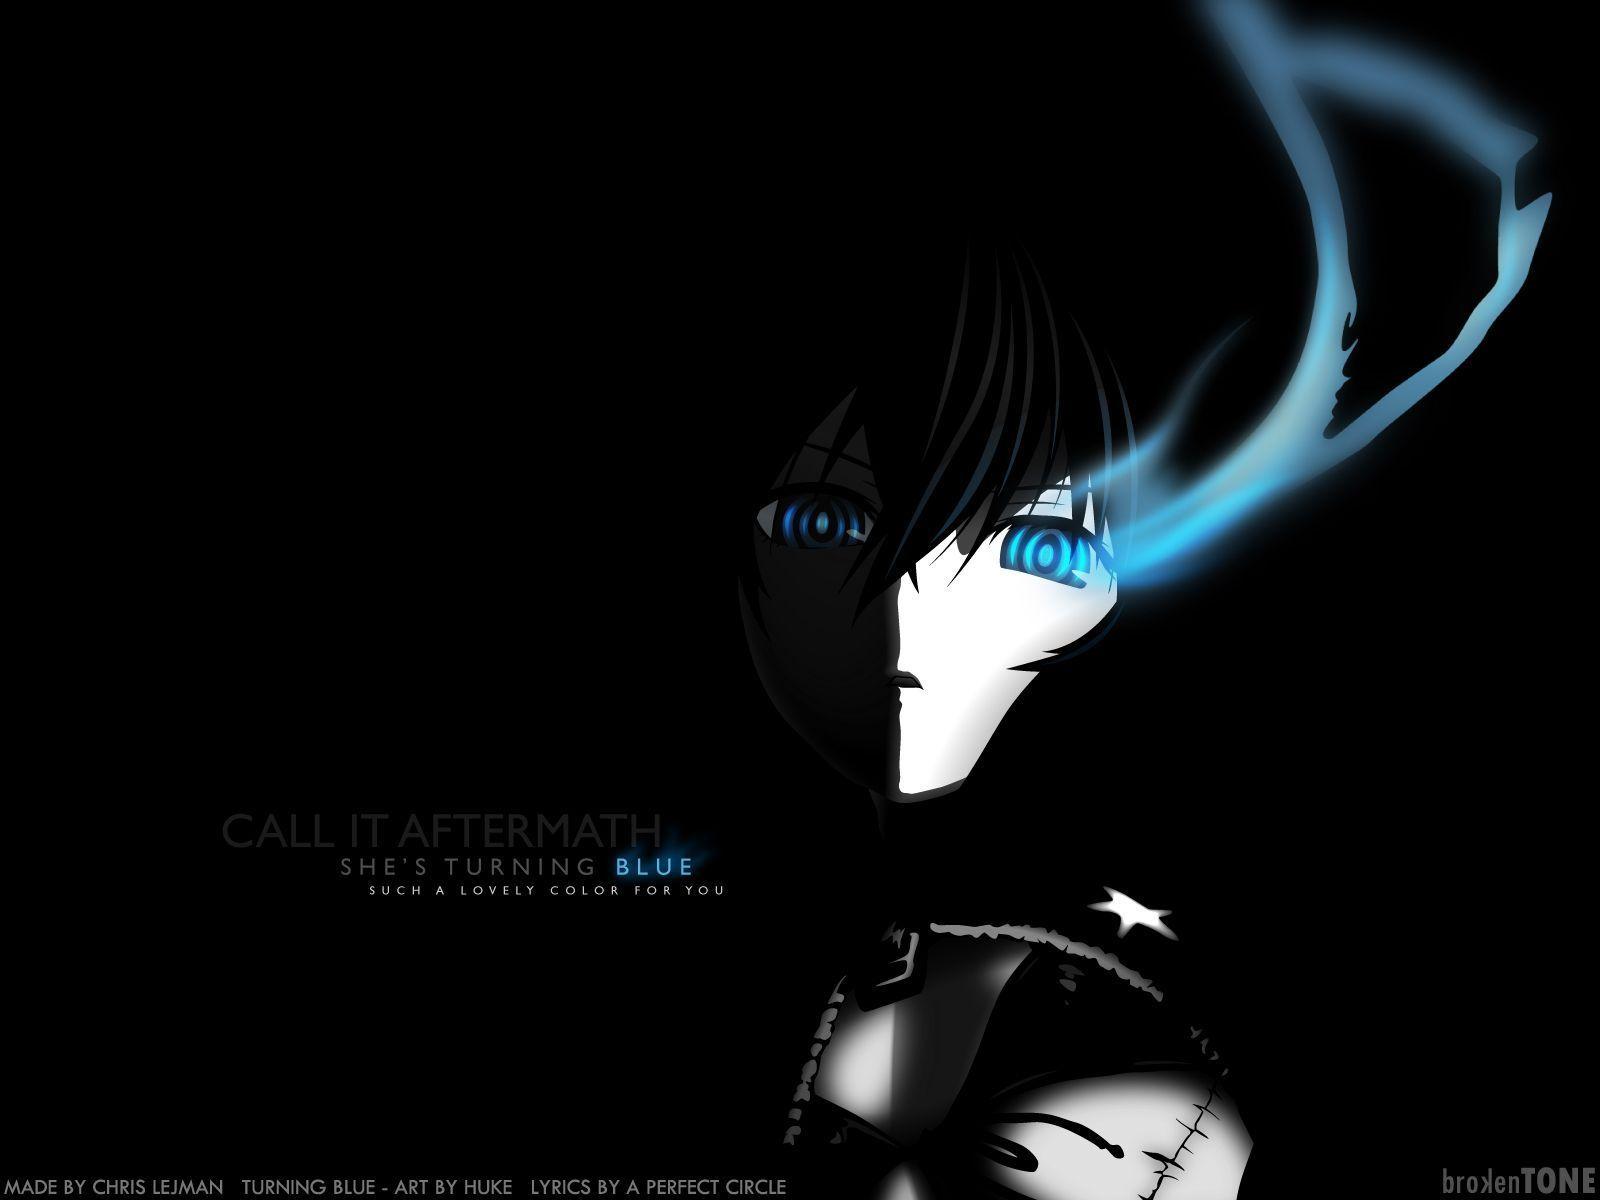  Black  Anime  Wallpapers  Wallpaper  Cave